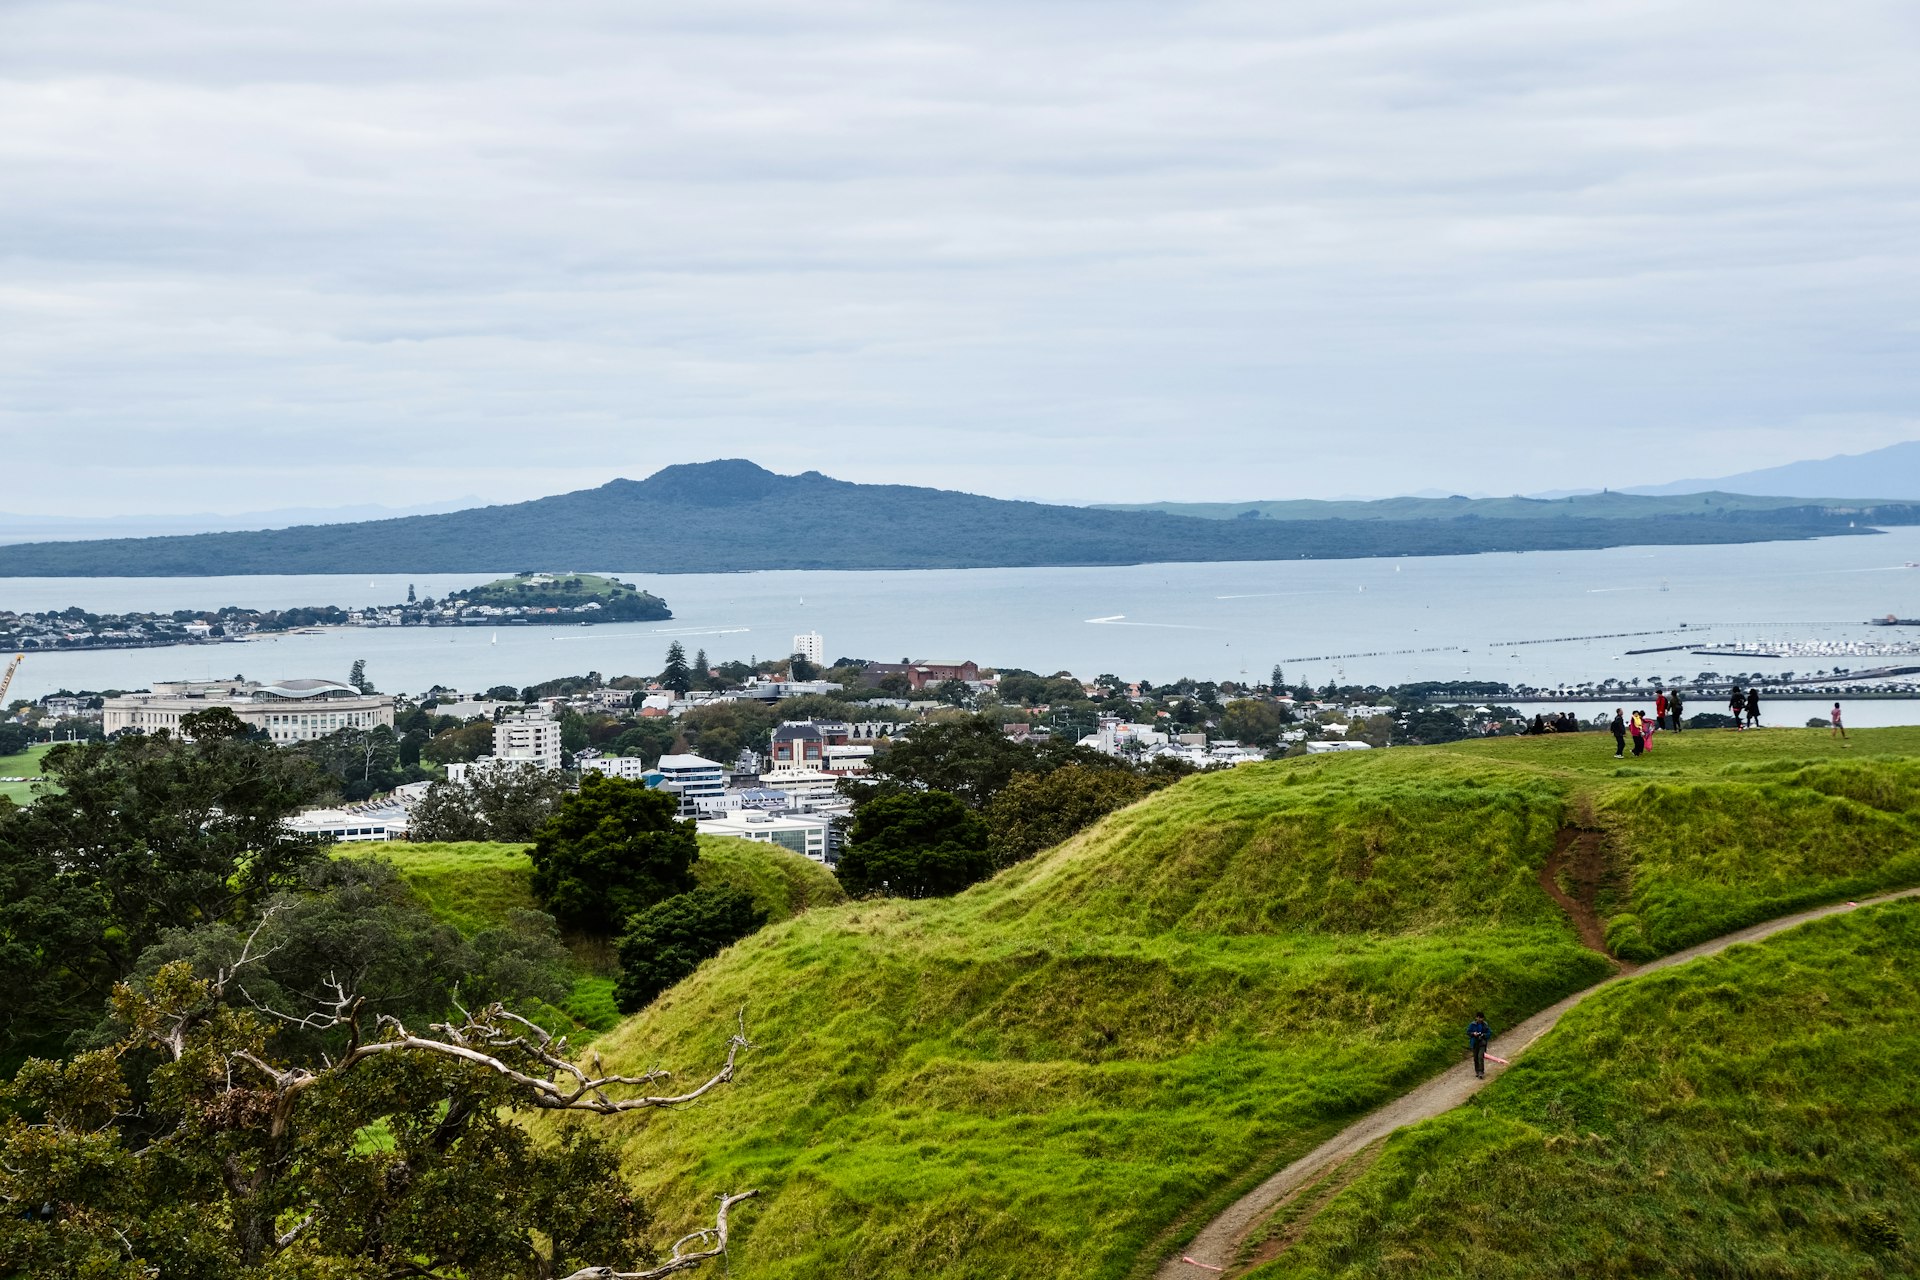 A grass-covered volcanic mound with several walkers on it on the edge of a bay 